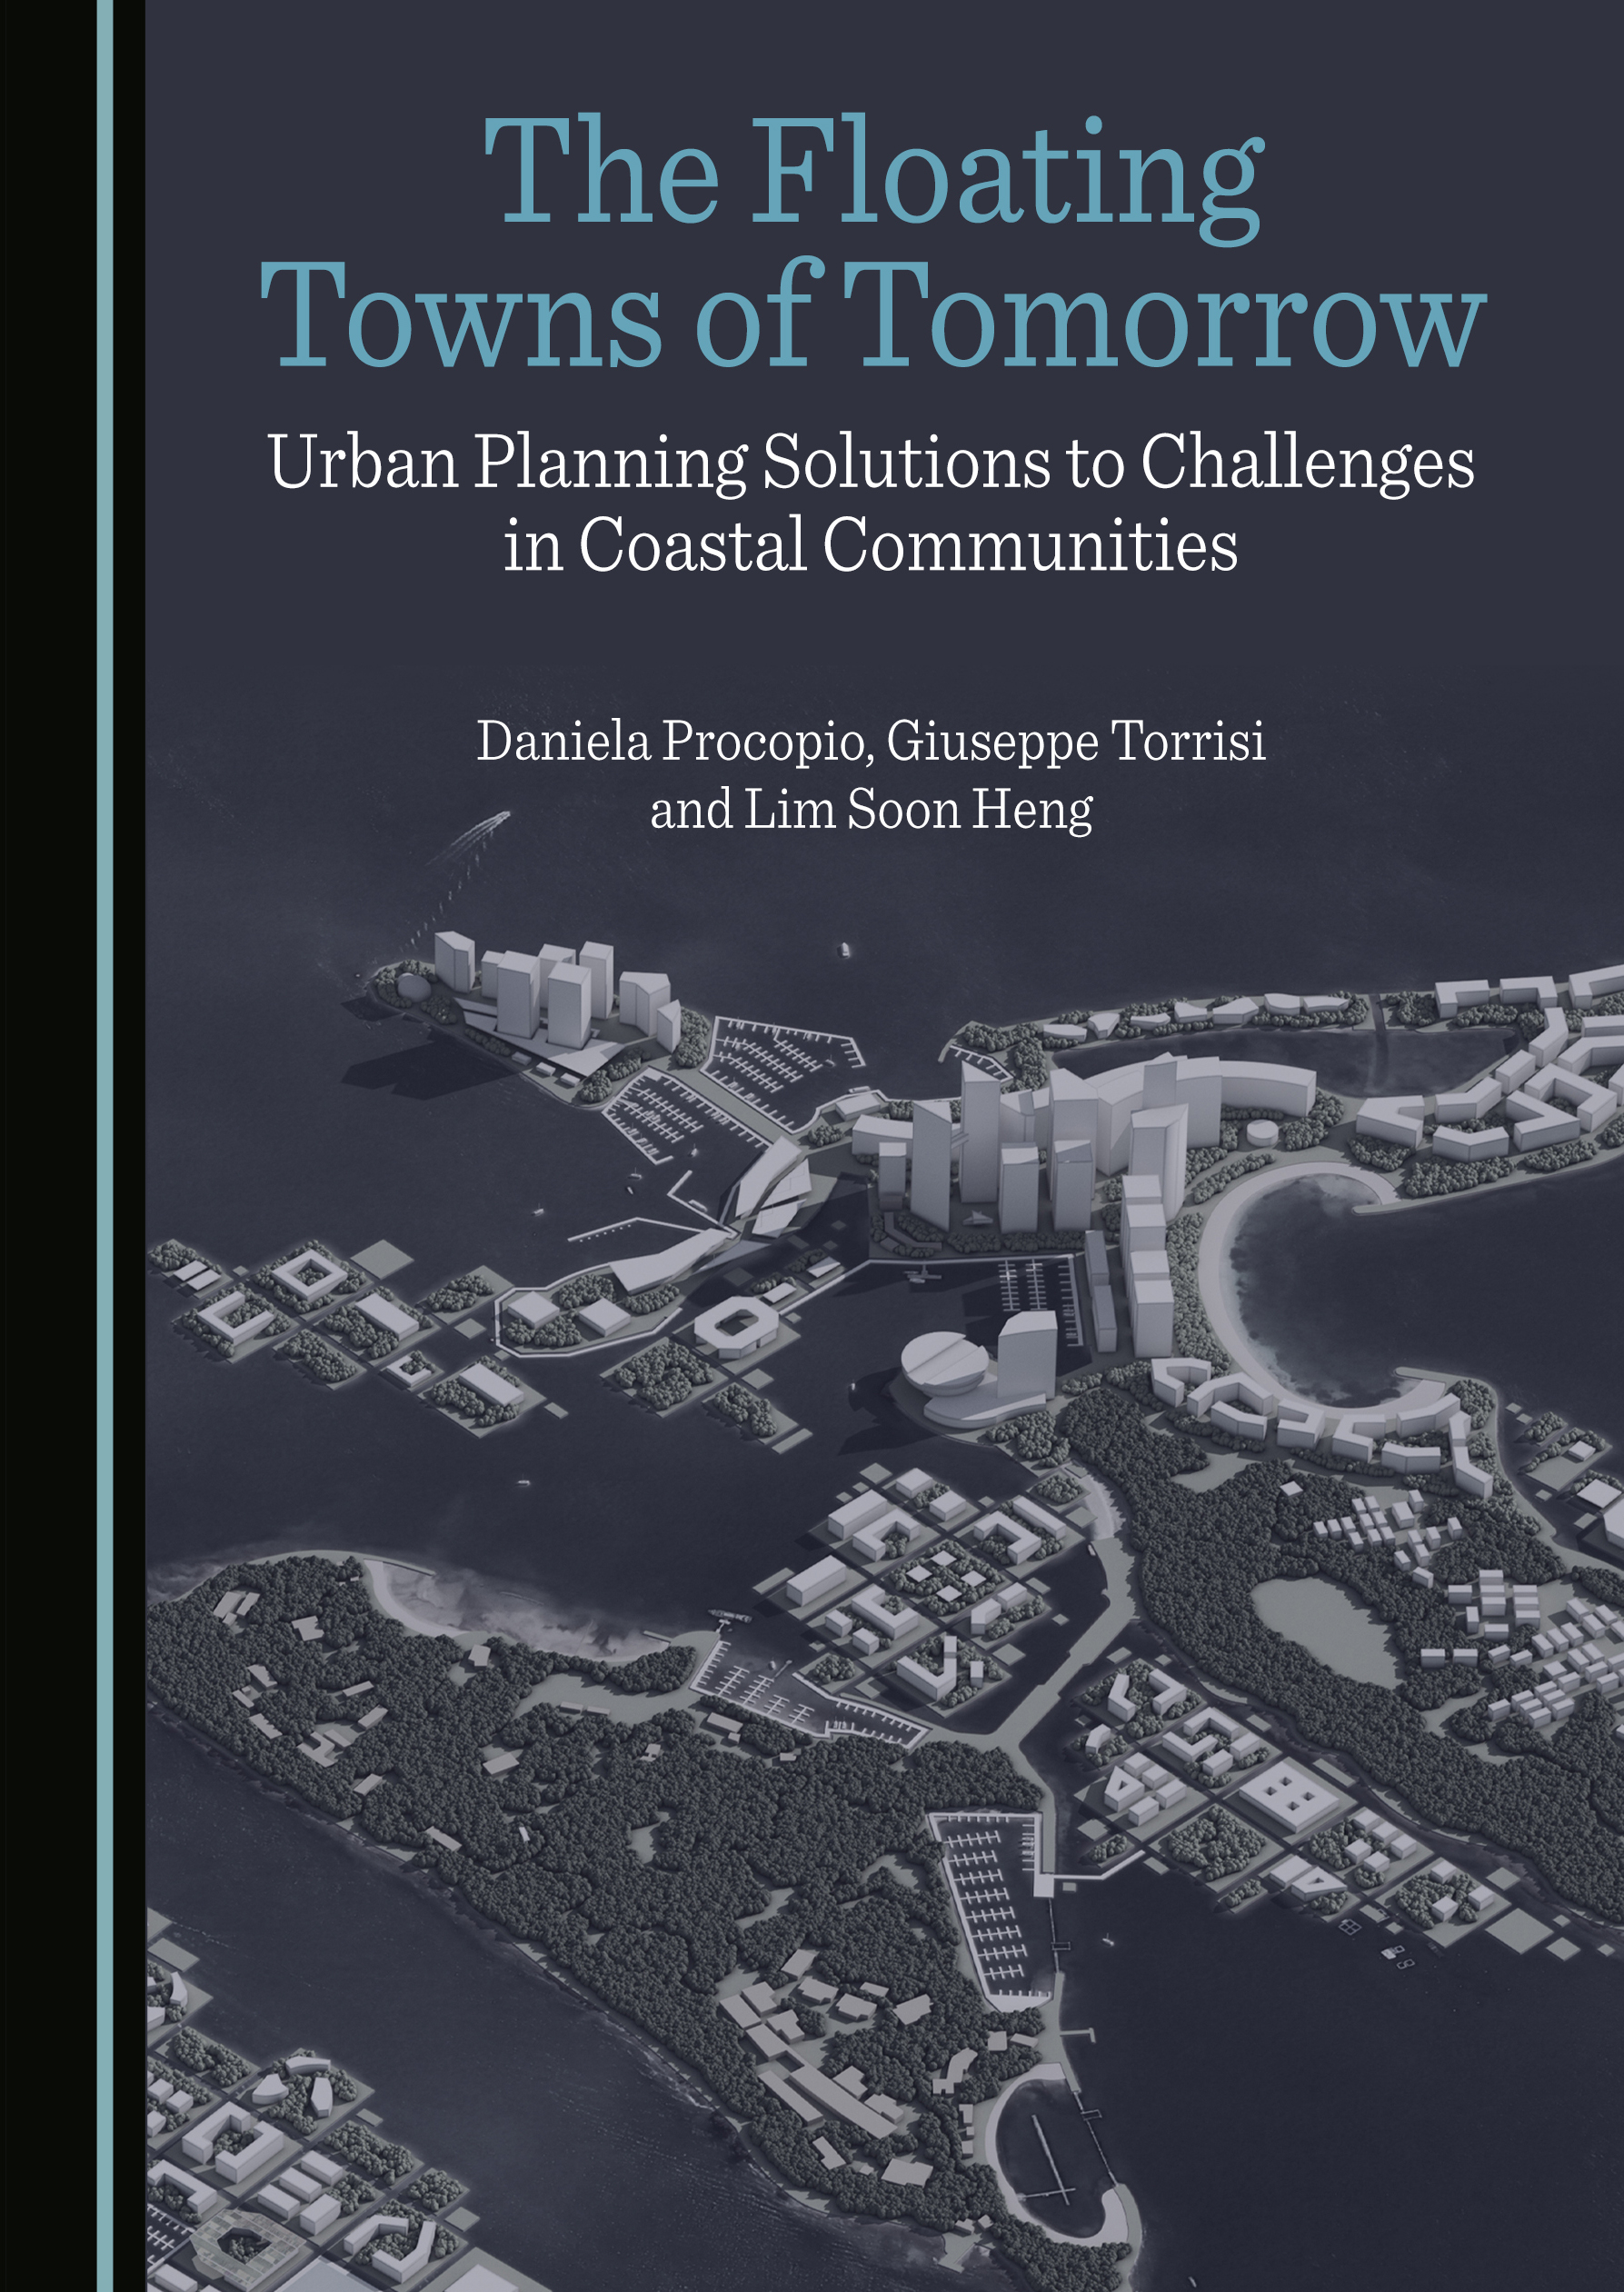 The Floating Towns of Tomorrow: Urban Planning Solutions to Challenges in Coastal Communities (by Lim Soon Heng, Daniela Procopio, and Giuseppe Torrisi)